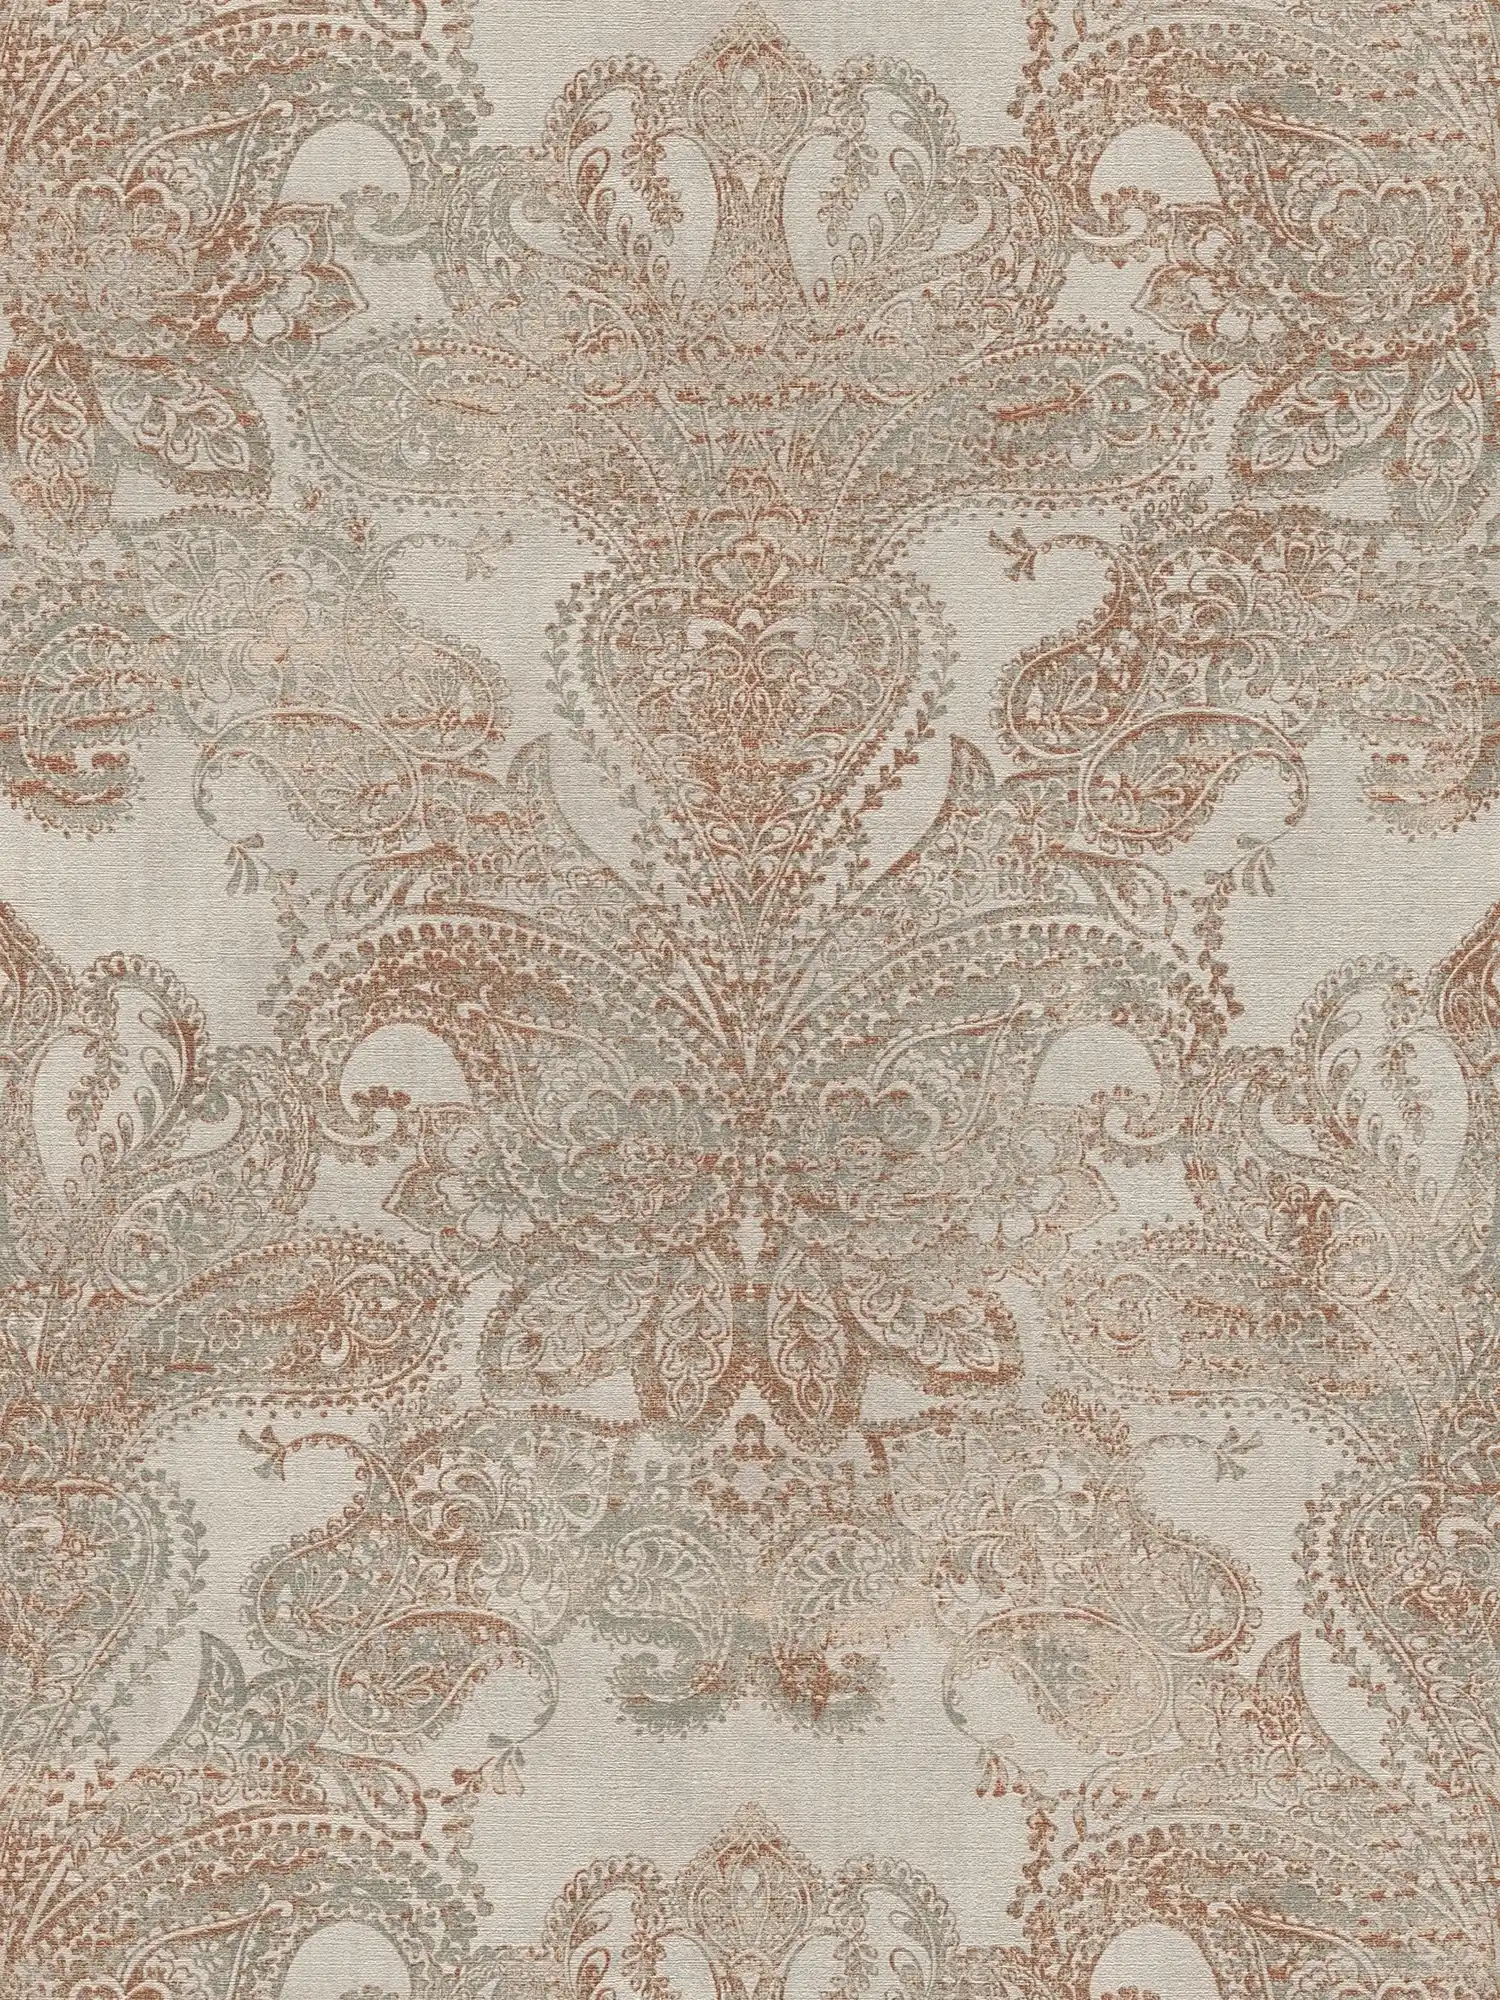         Classic baroque wallpaper with ornaments - beige, grey, reddish brown
    